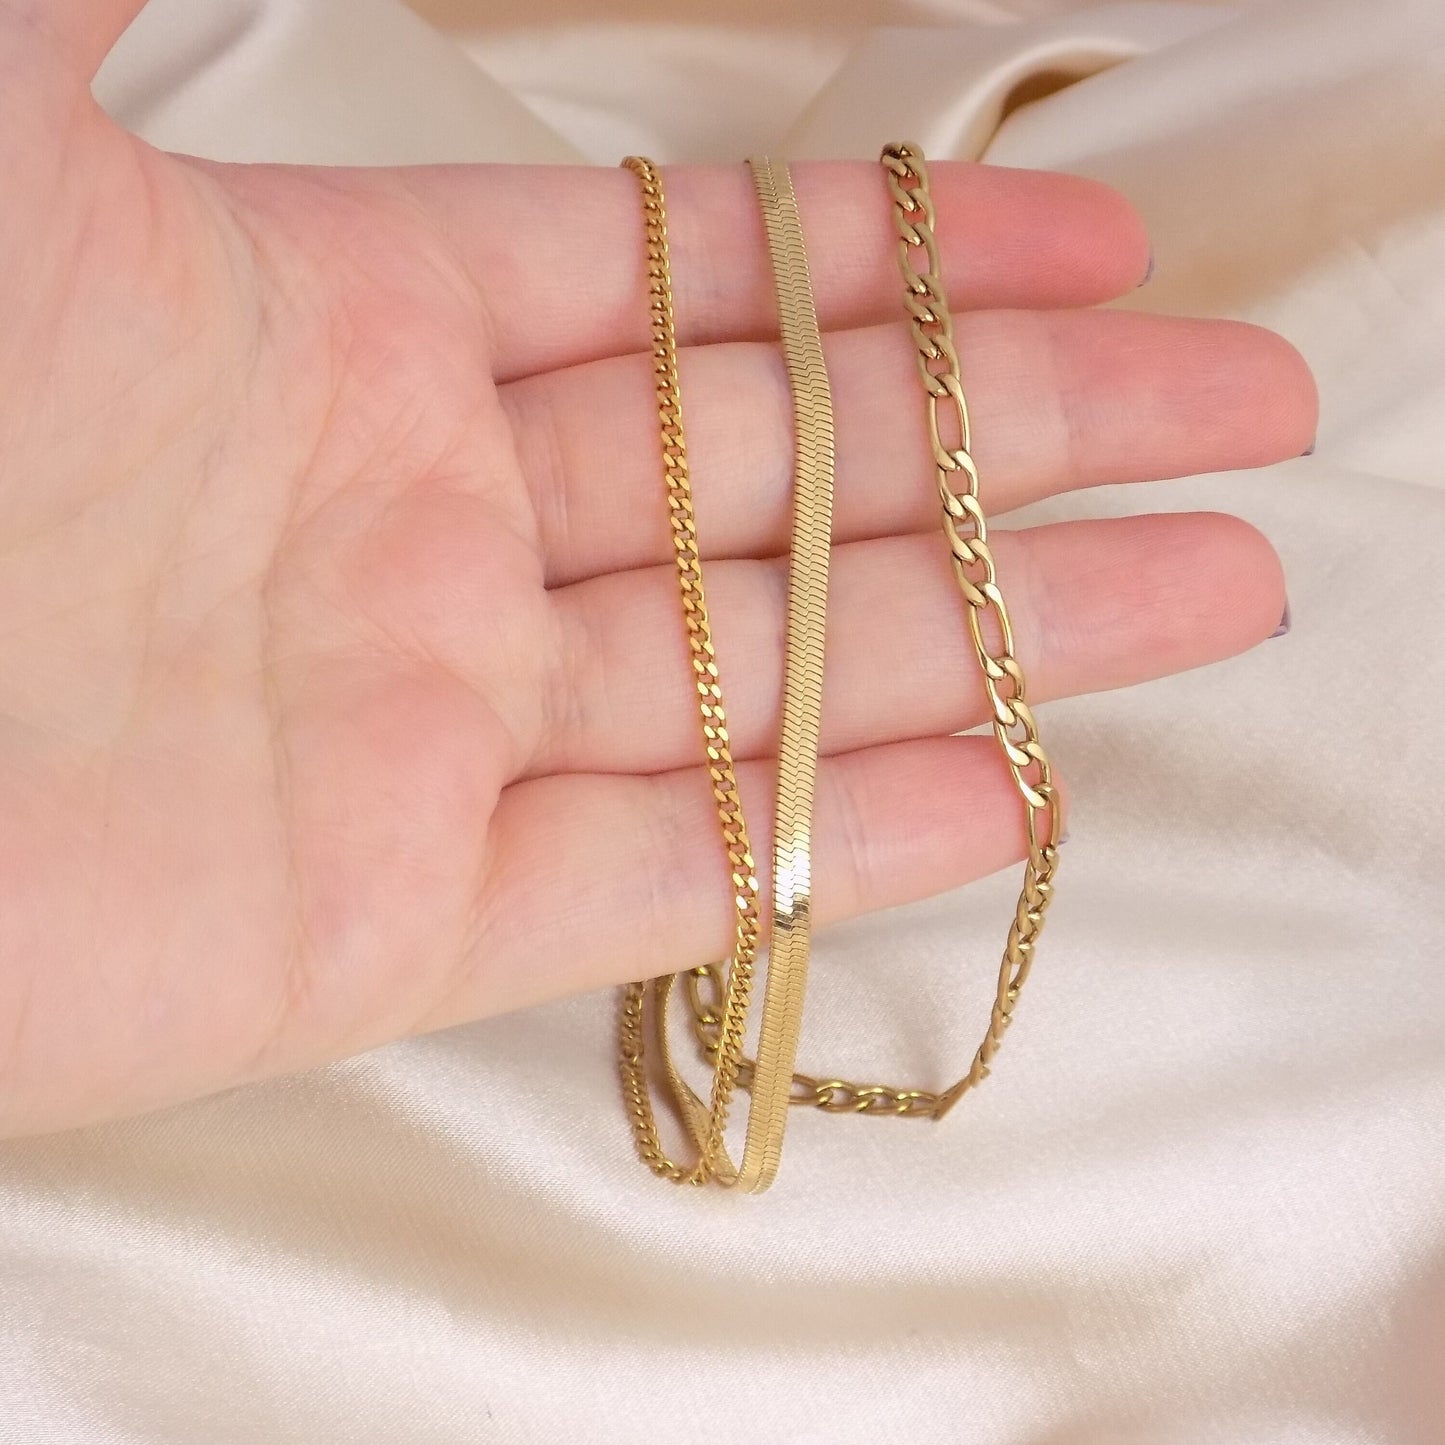 Gold Choker Necklace - 18K Gold Stainless Steel Chain